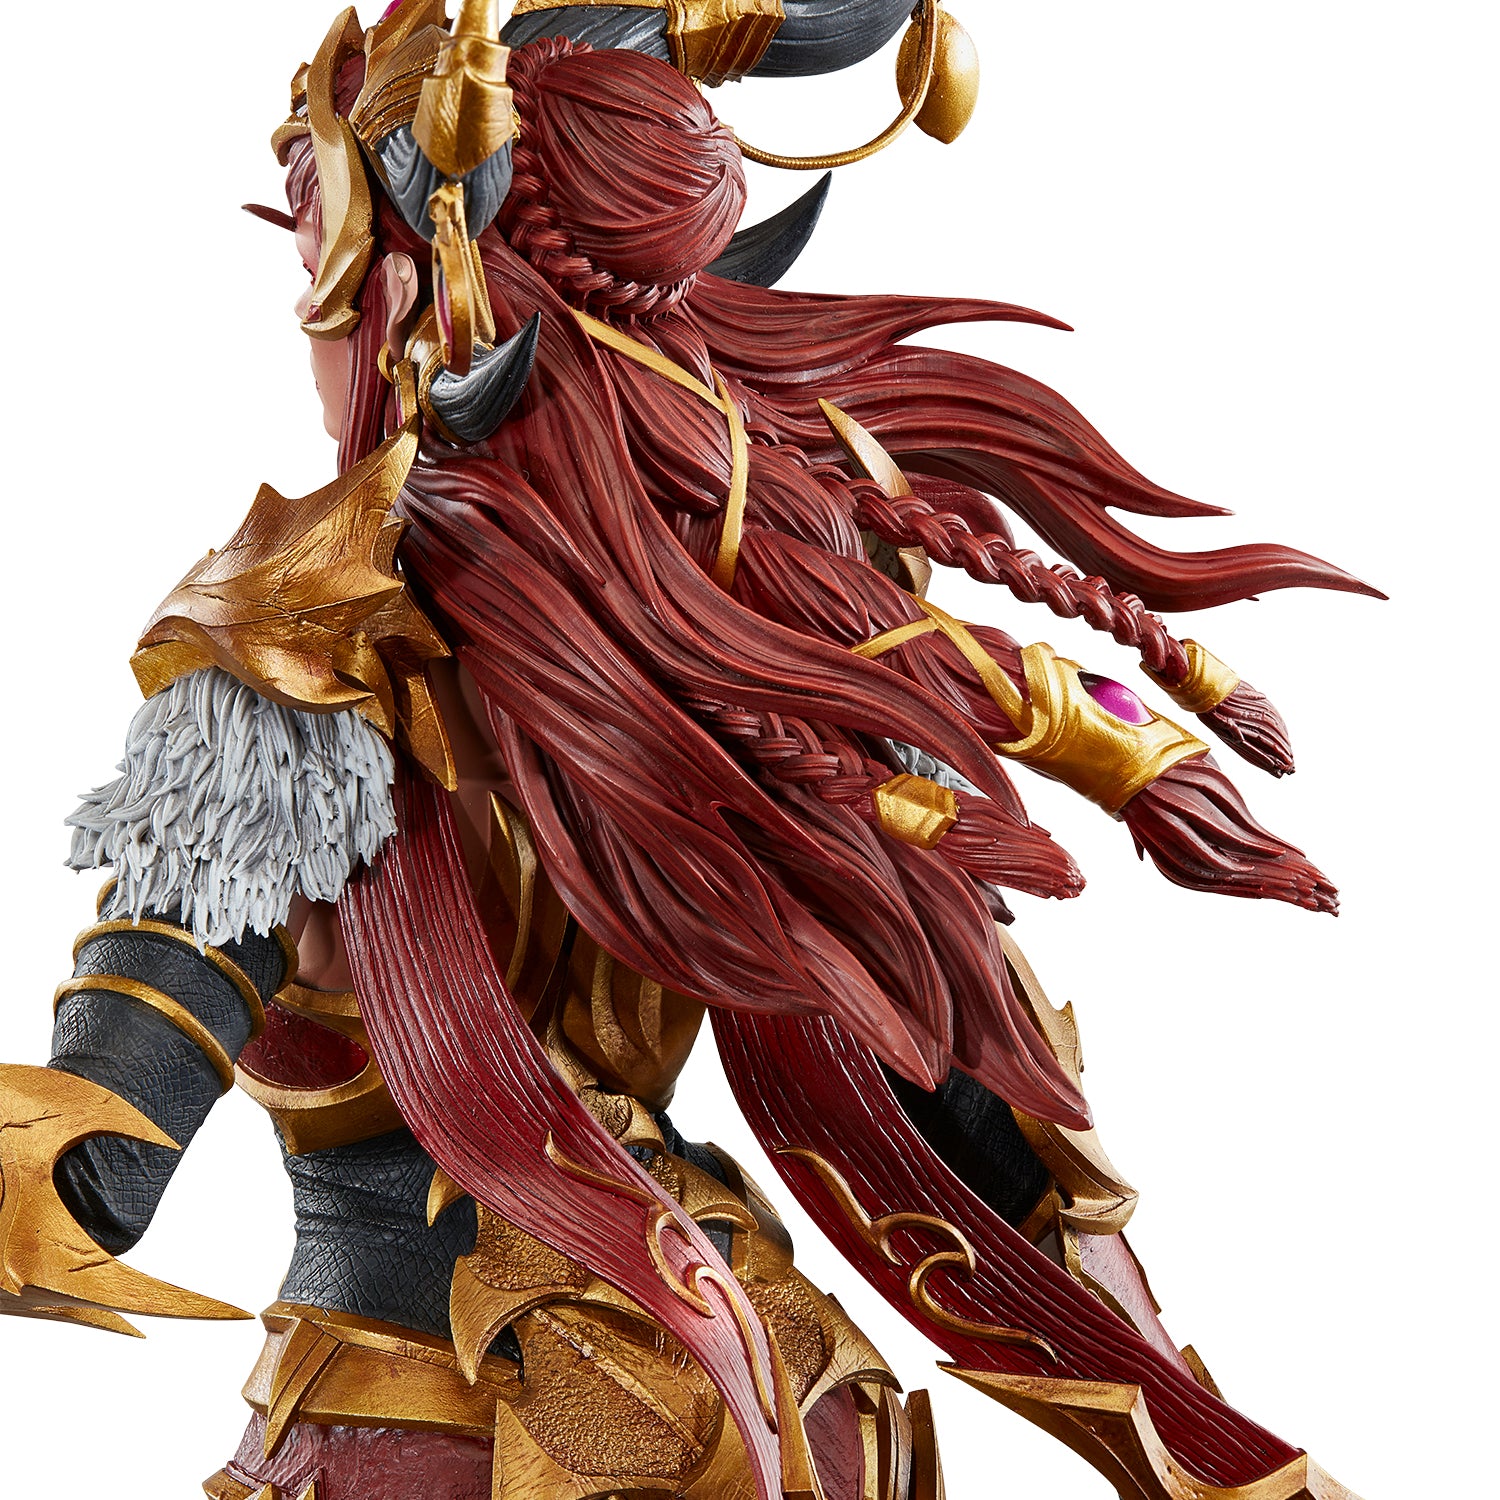 World of Warcraft Alexstrasza 20in Statue - Close Up of Back Side View